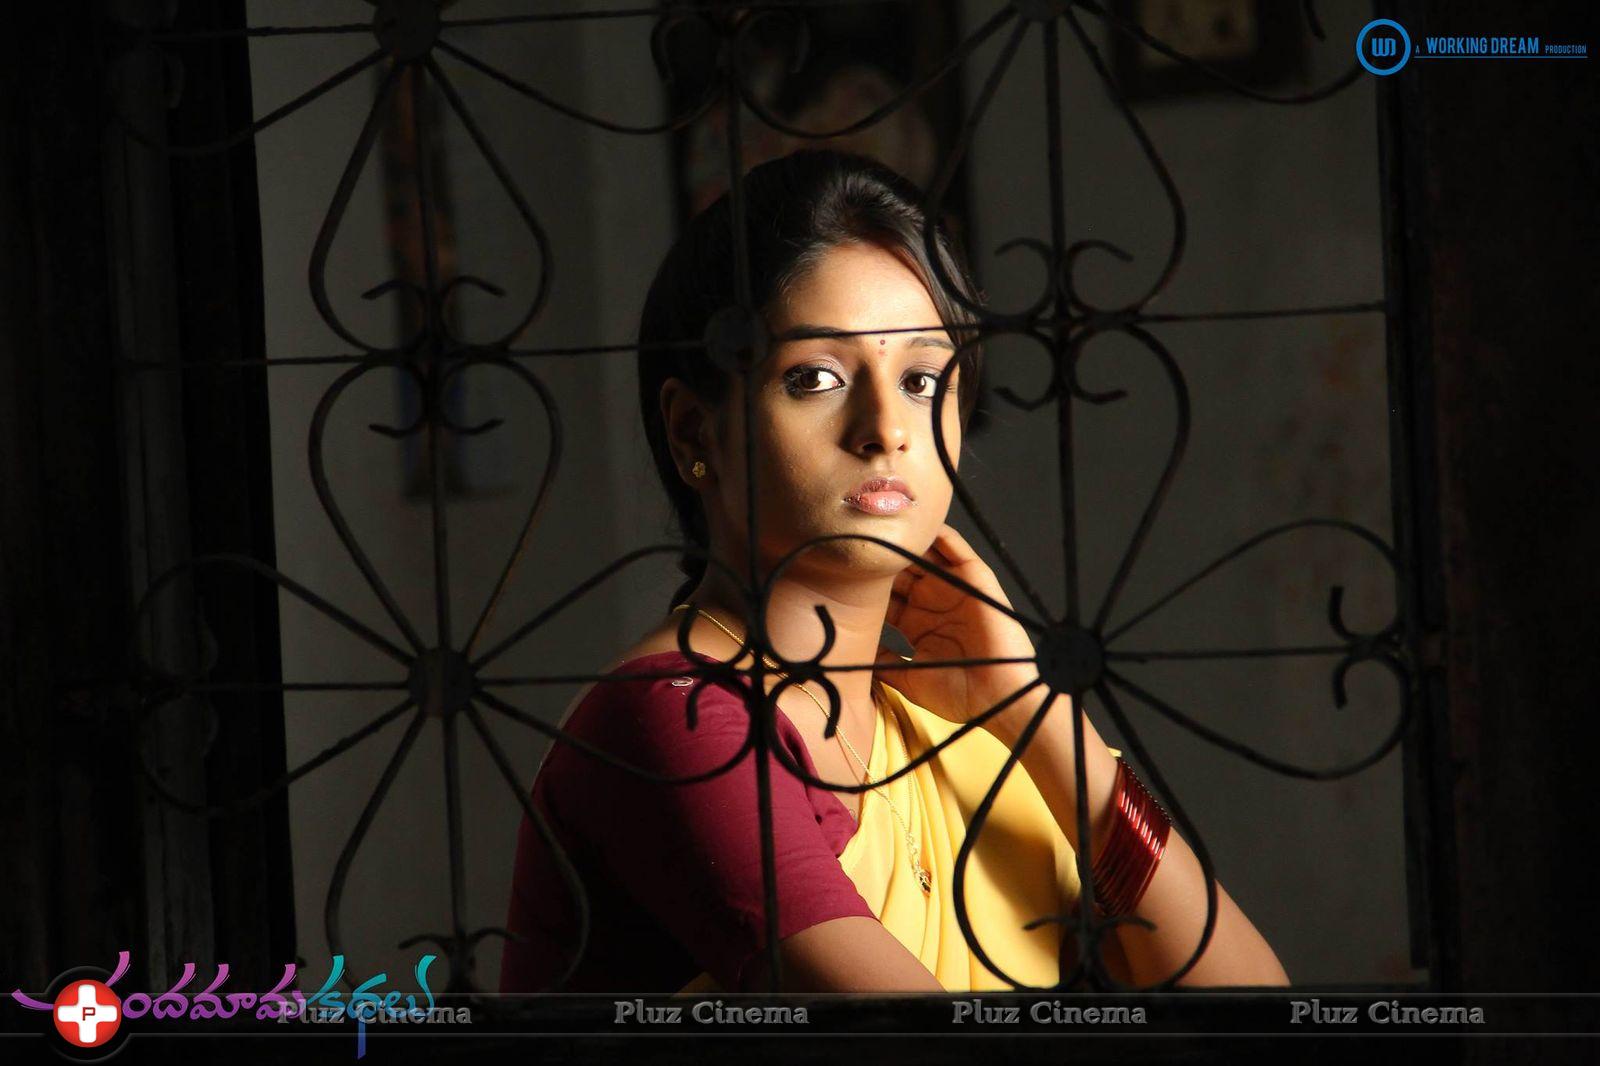 Chandamama Kathalu Movie New Pictures | Picture 707697